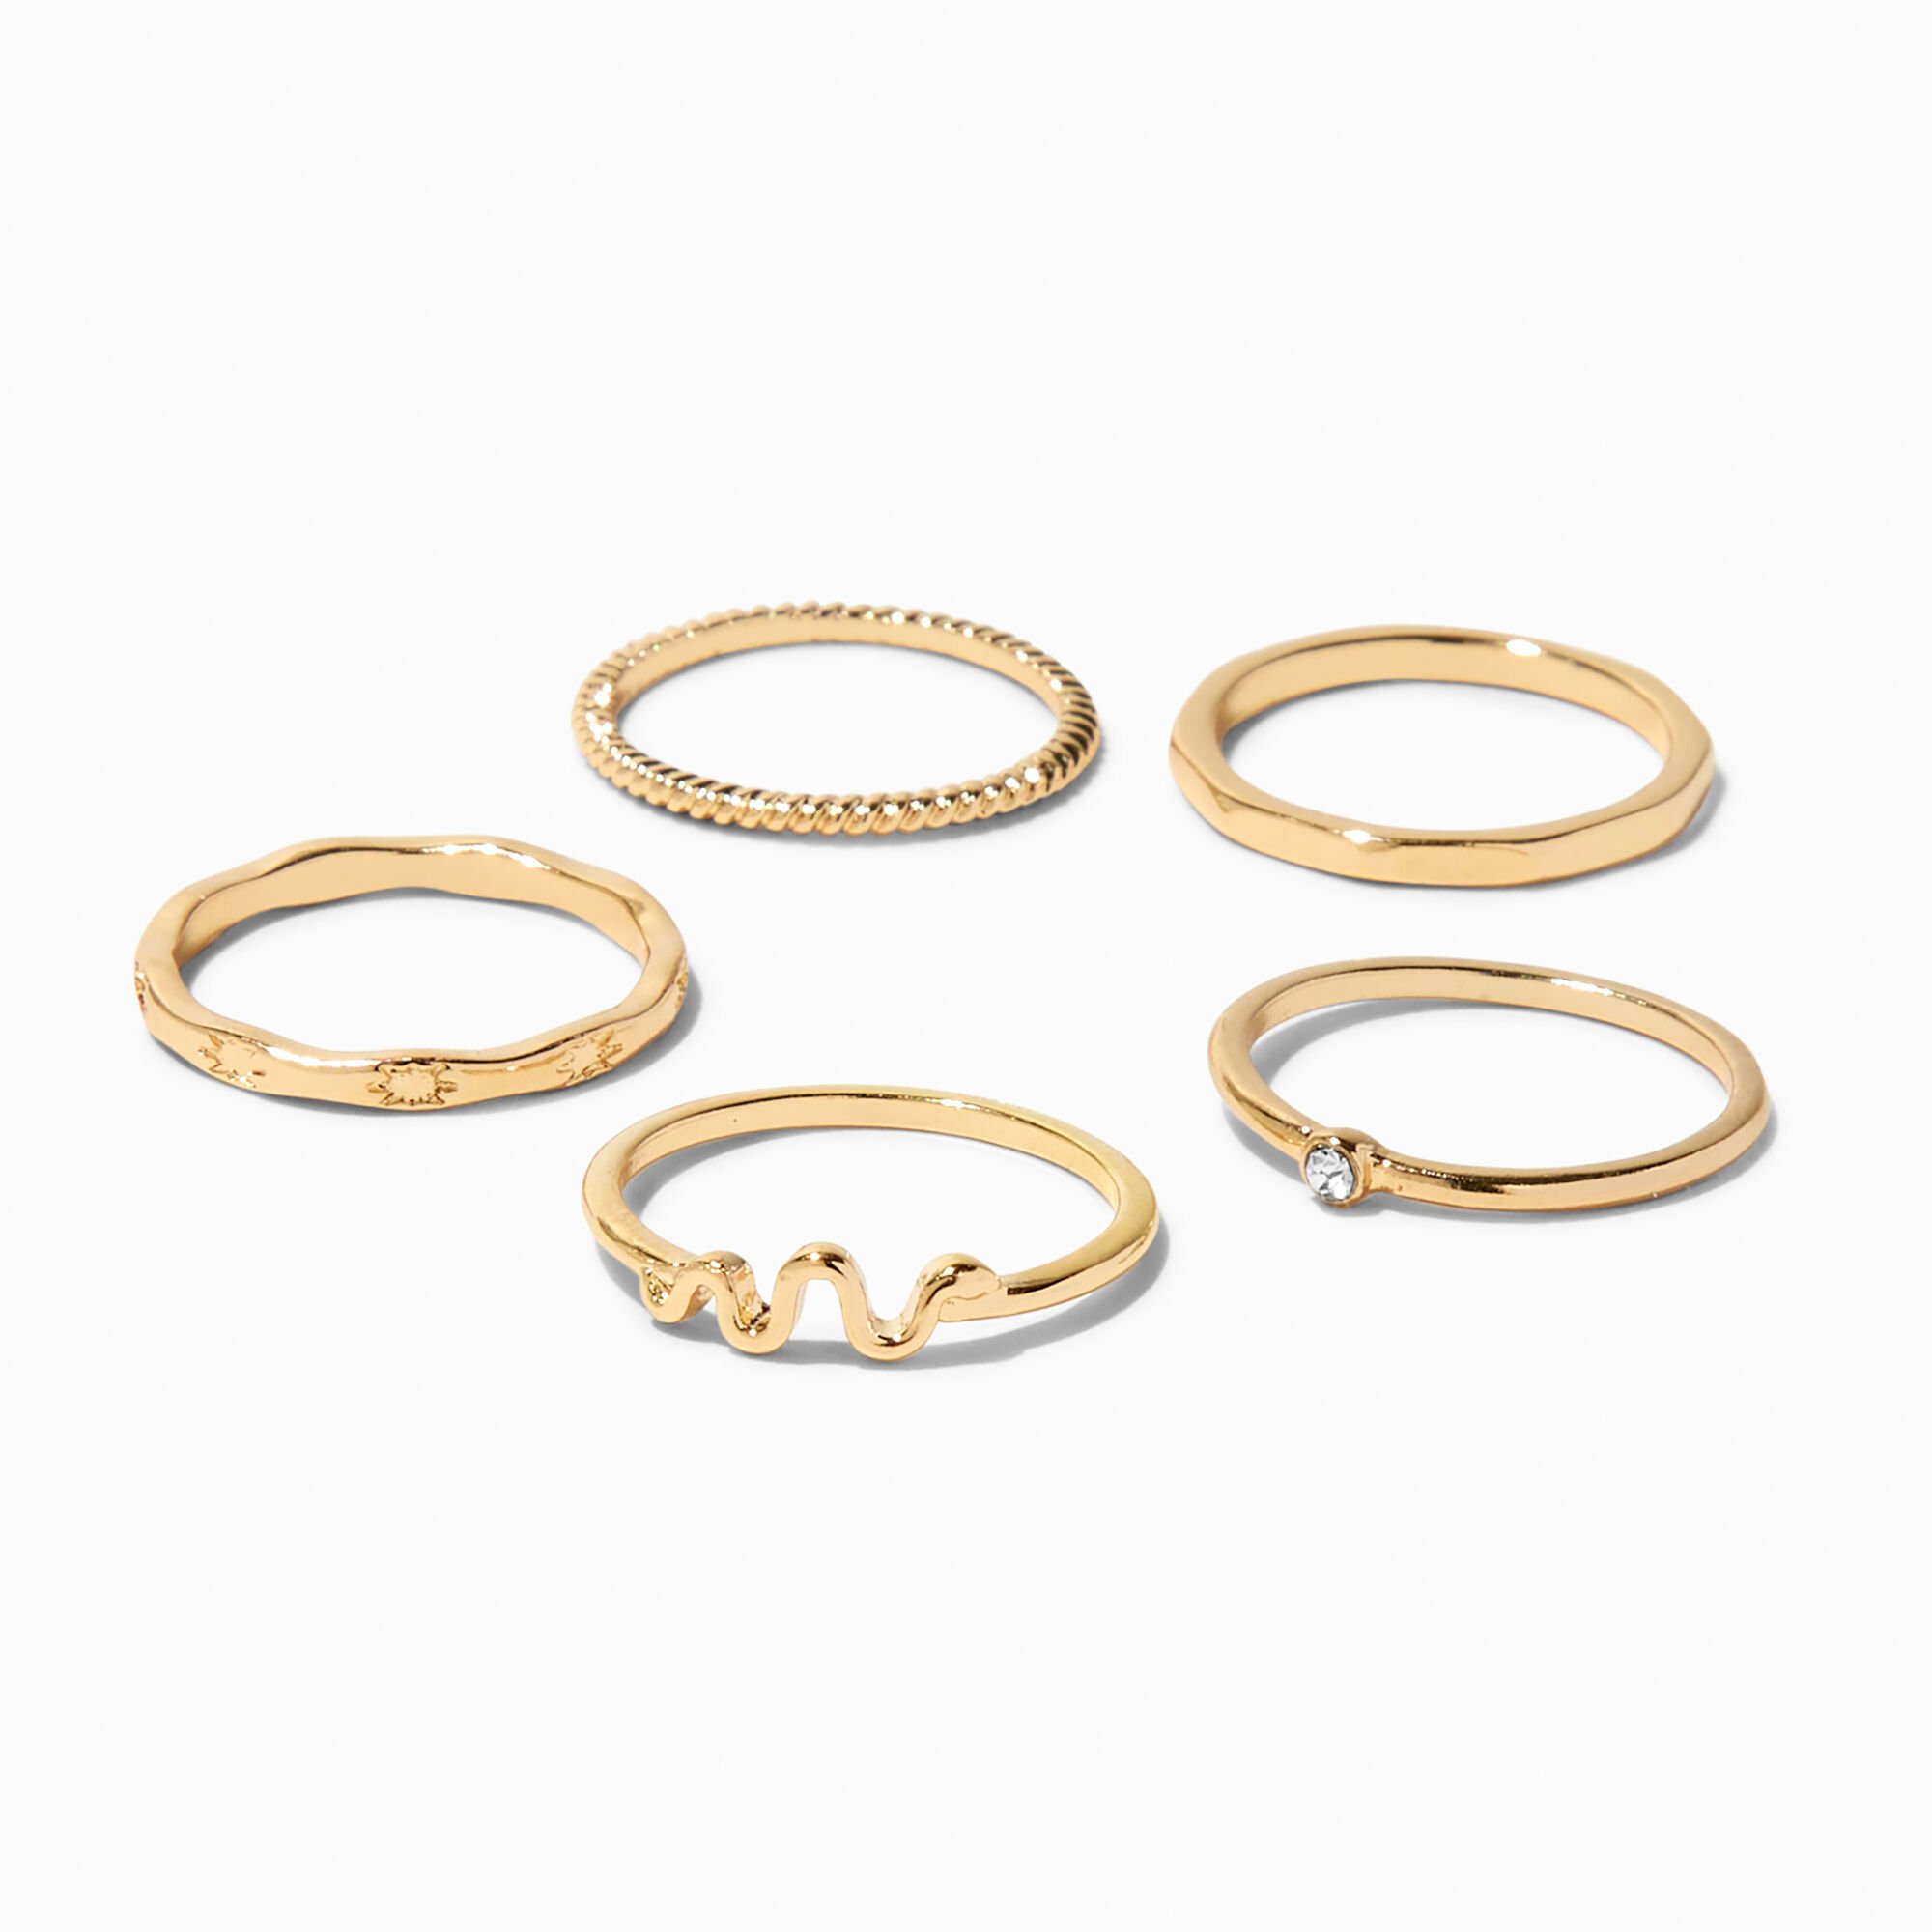 View Claires Delicate Snake Rings 5 Pack Gold information